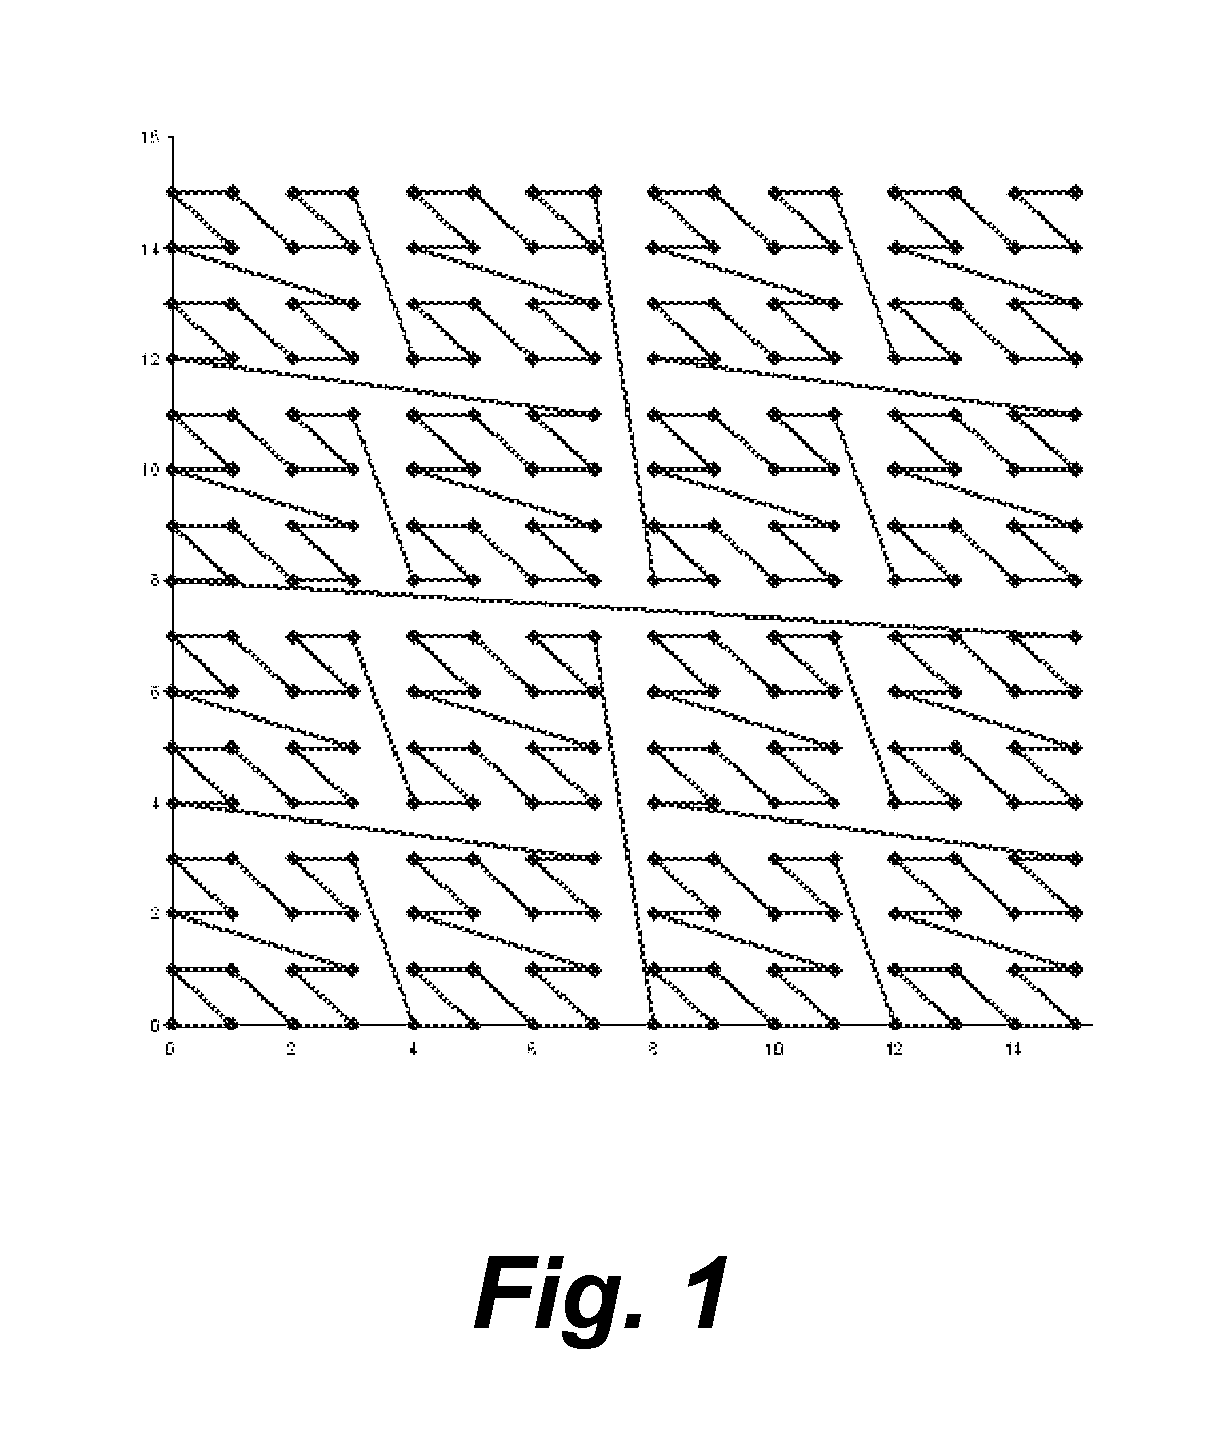 Method for Semantic Indexing of Big Data Using a Multidimensional, Hierarchical Scheme